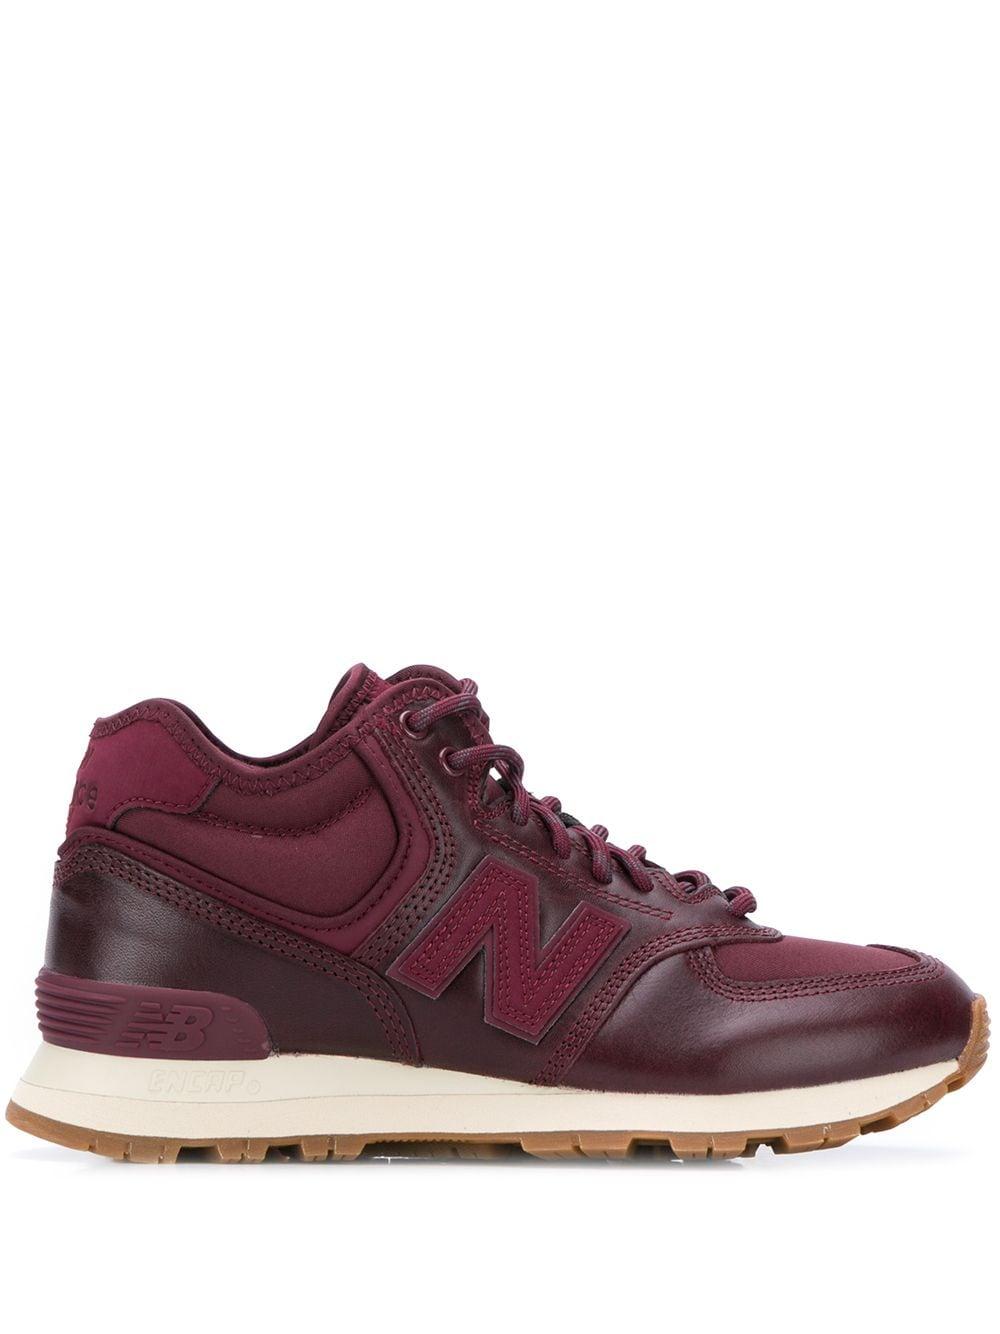 New Balance Leather Wh574 Sneakers in Purple - Lyst